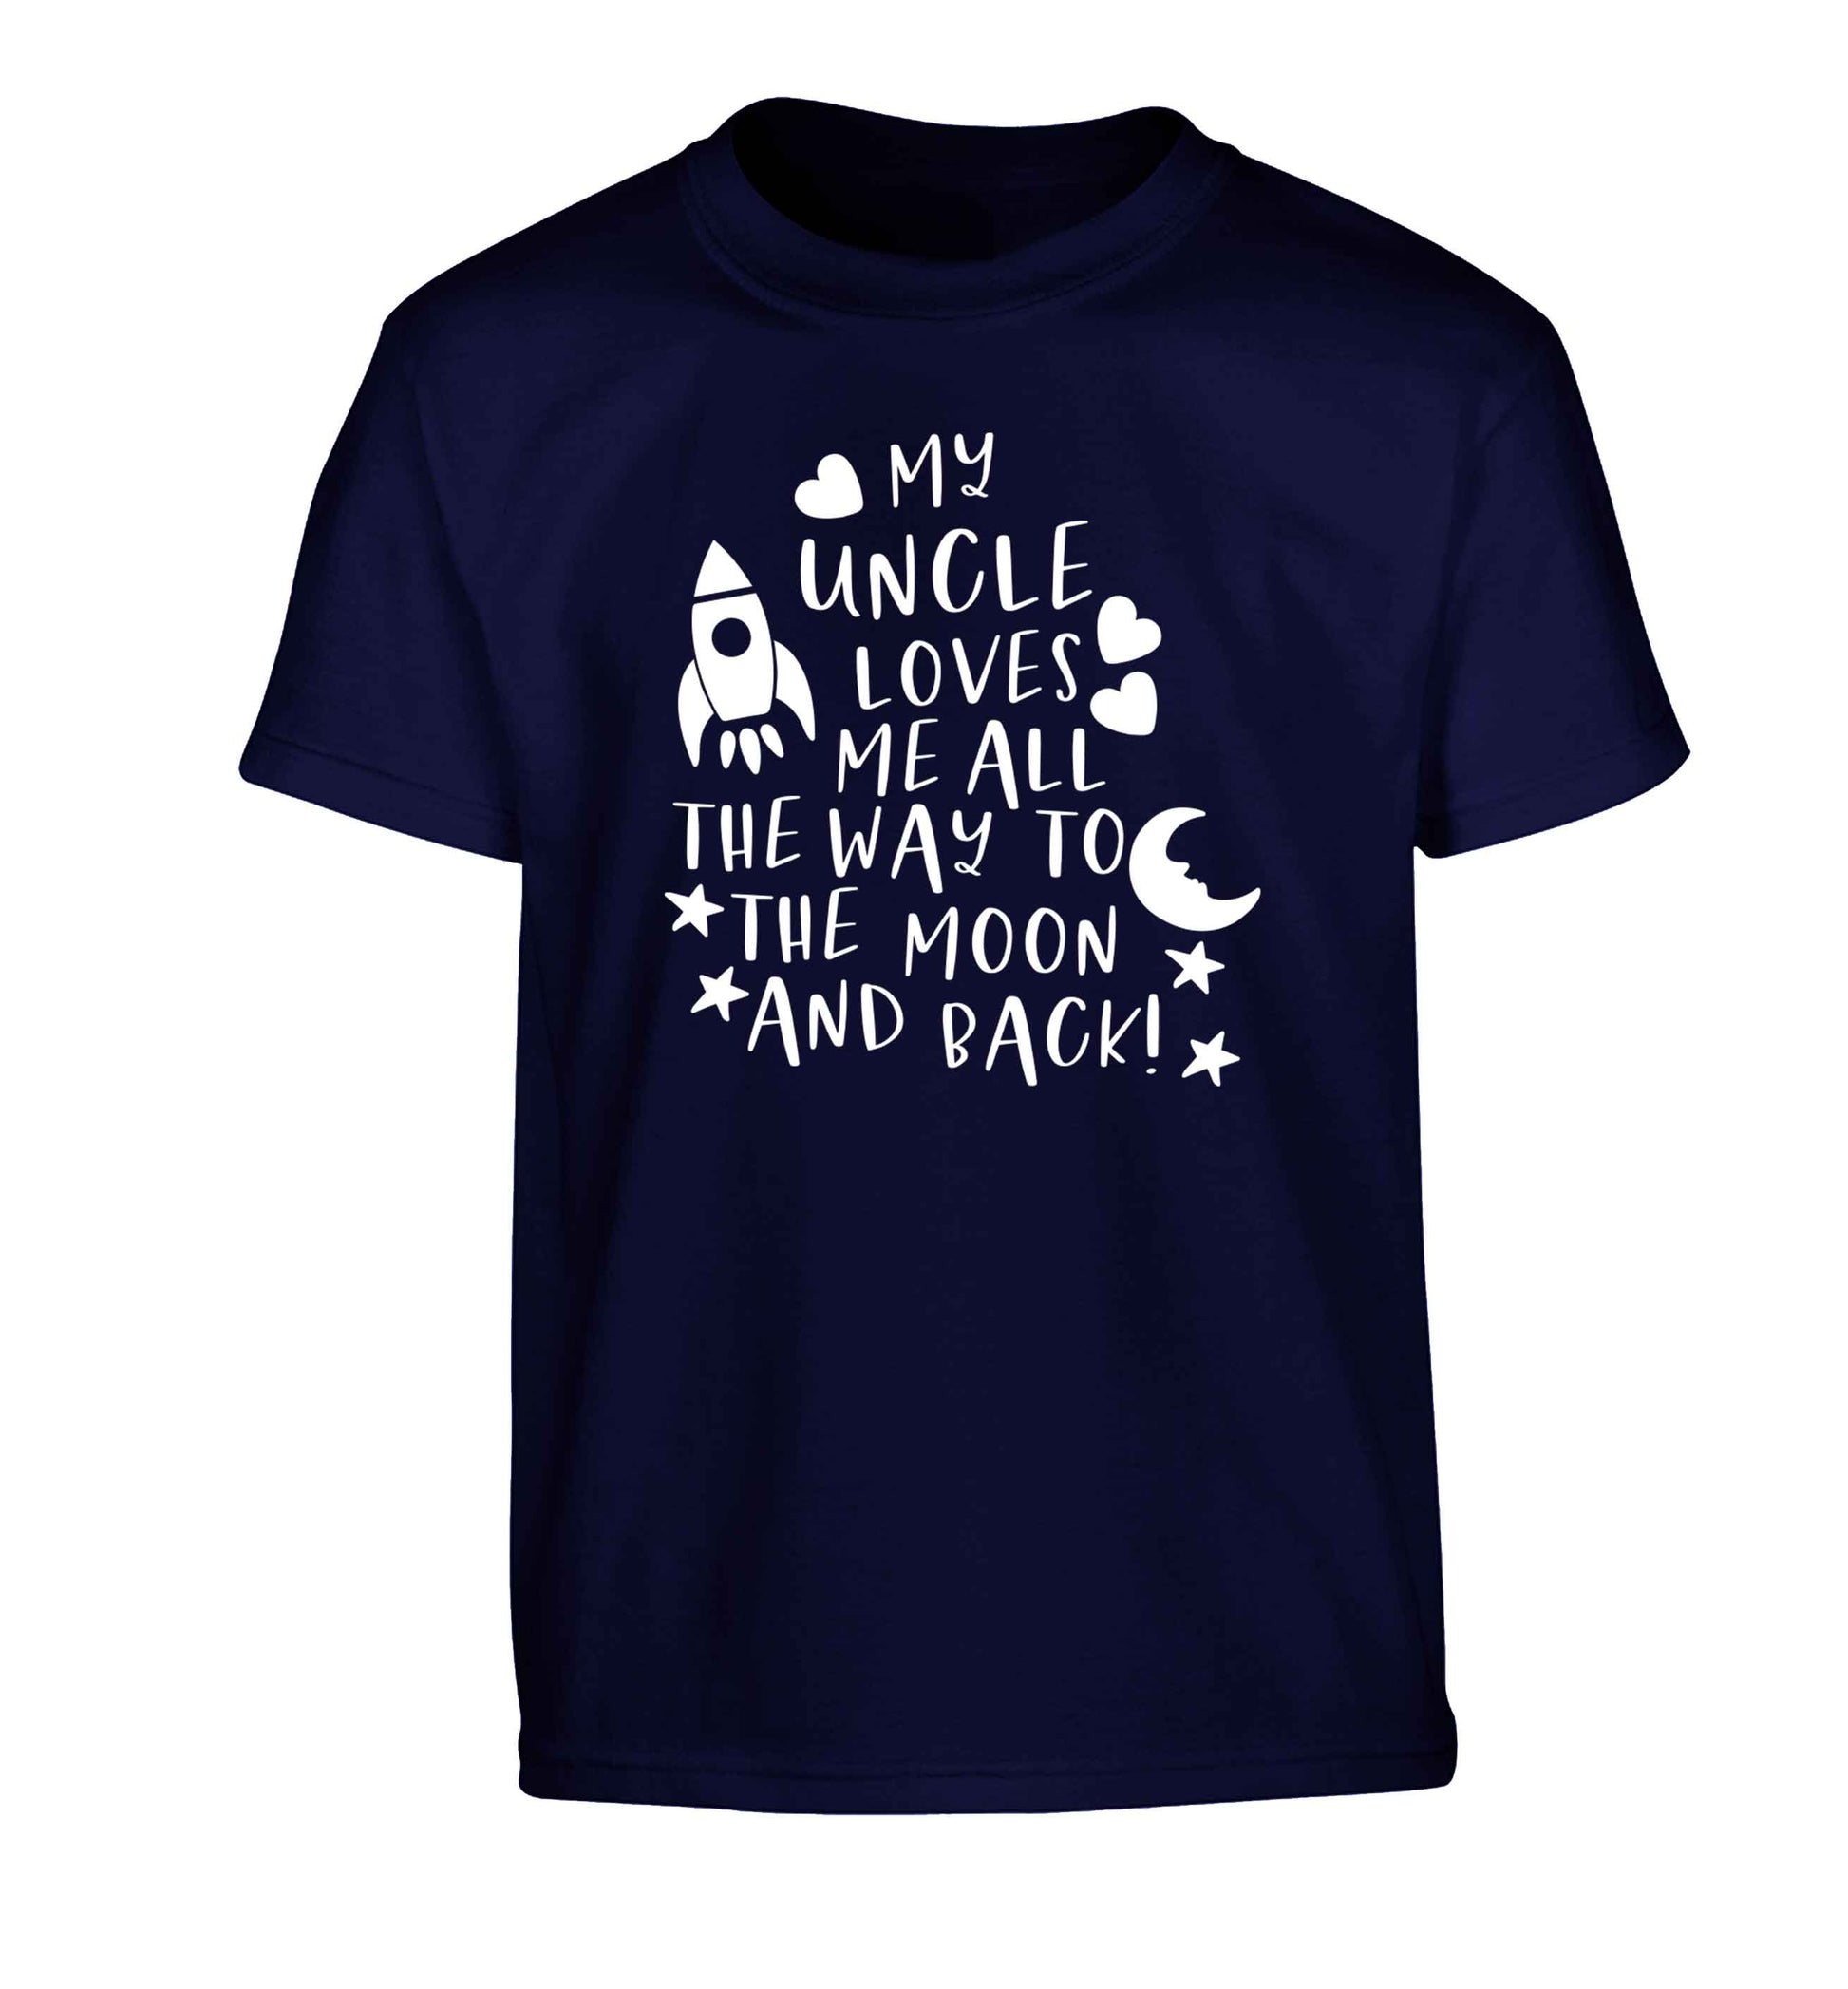 My uncle loves me all the way to the moon and back Children's navy Tshirt 12-13 Years